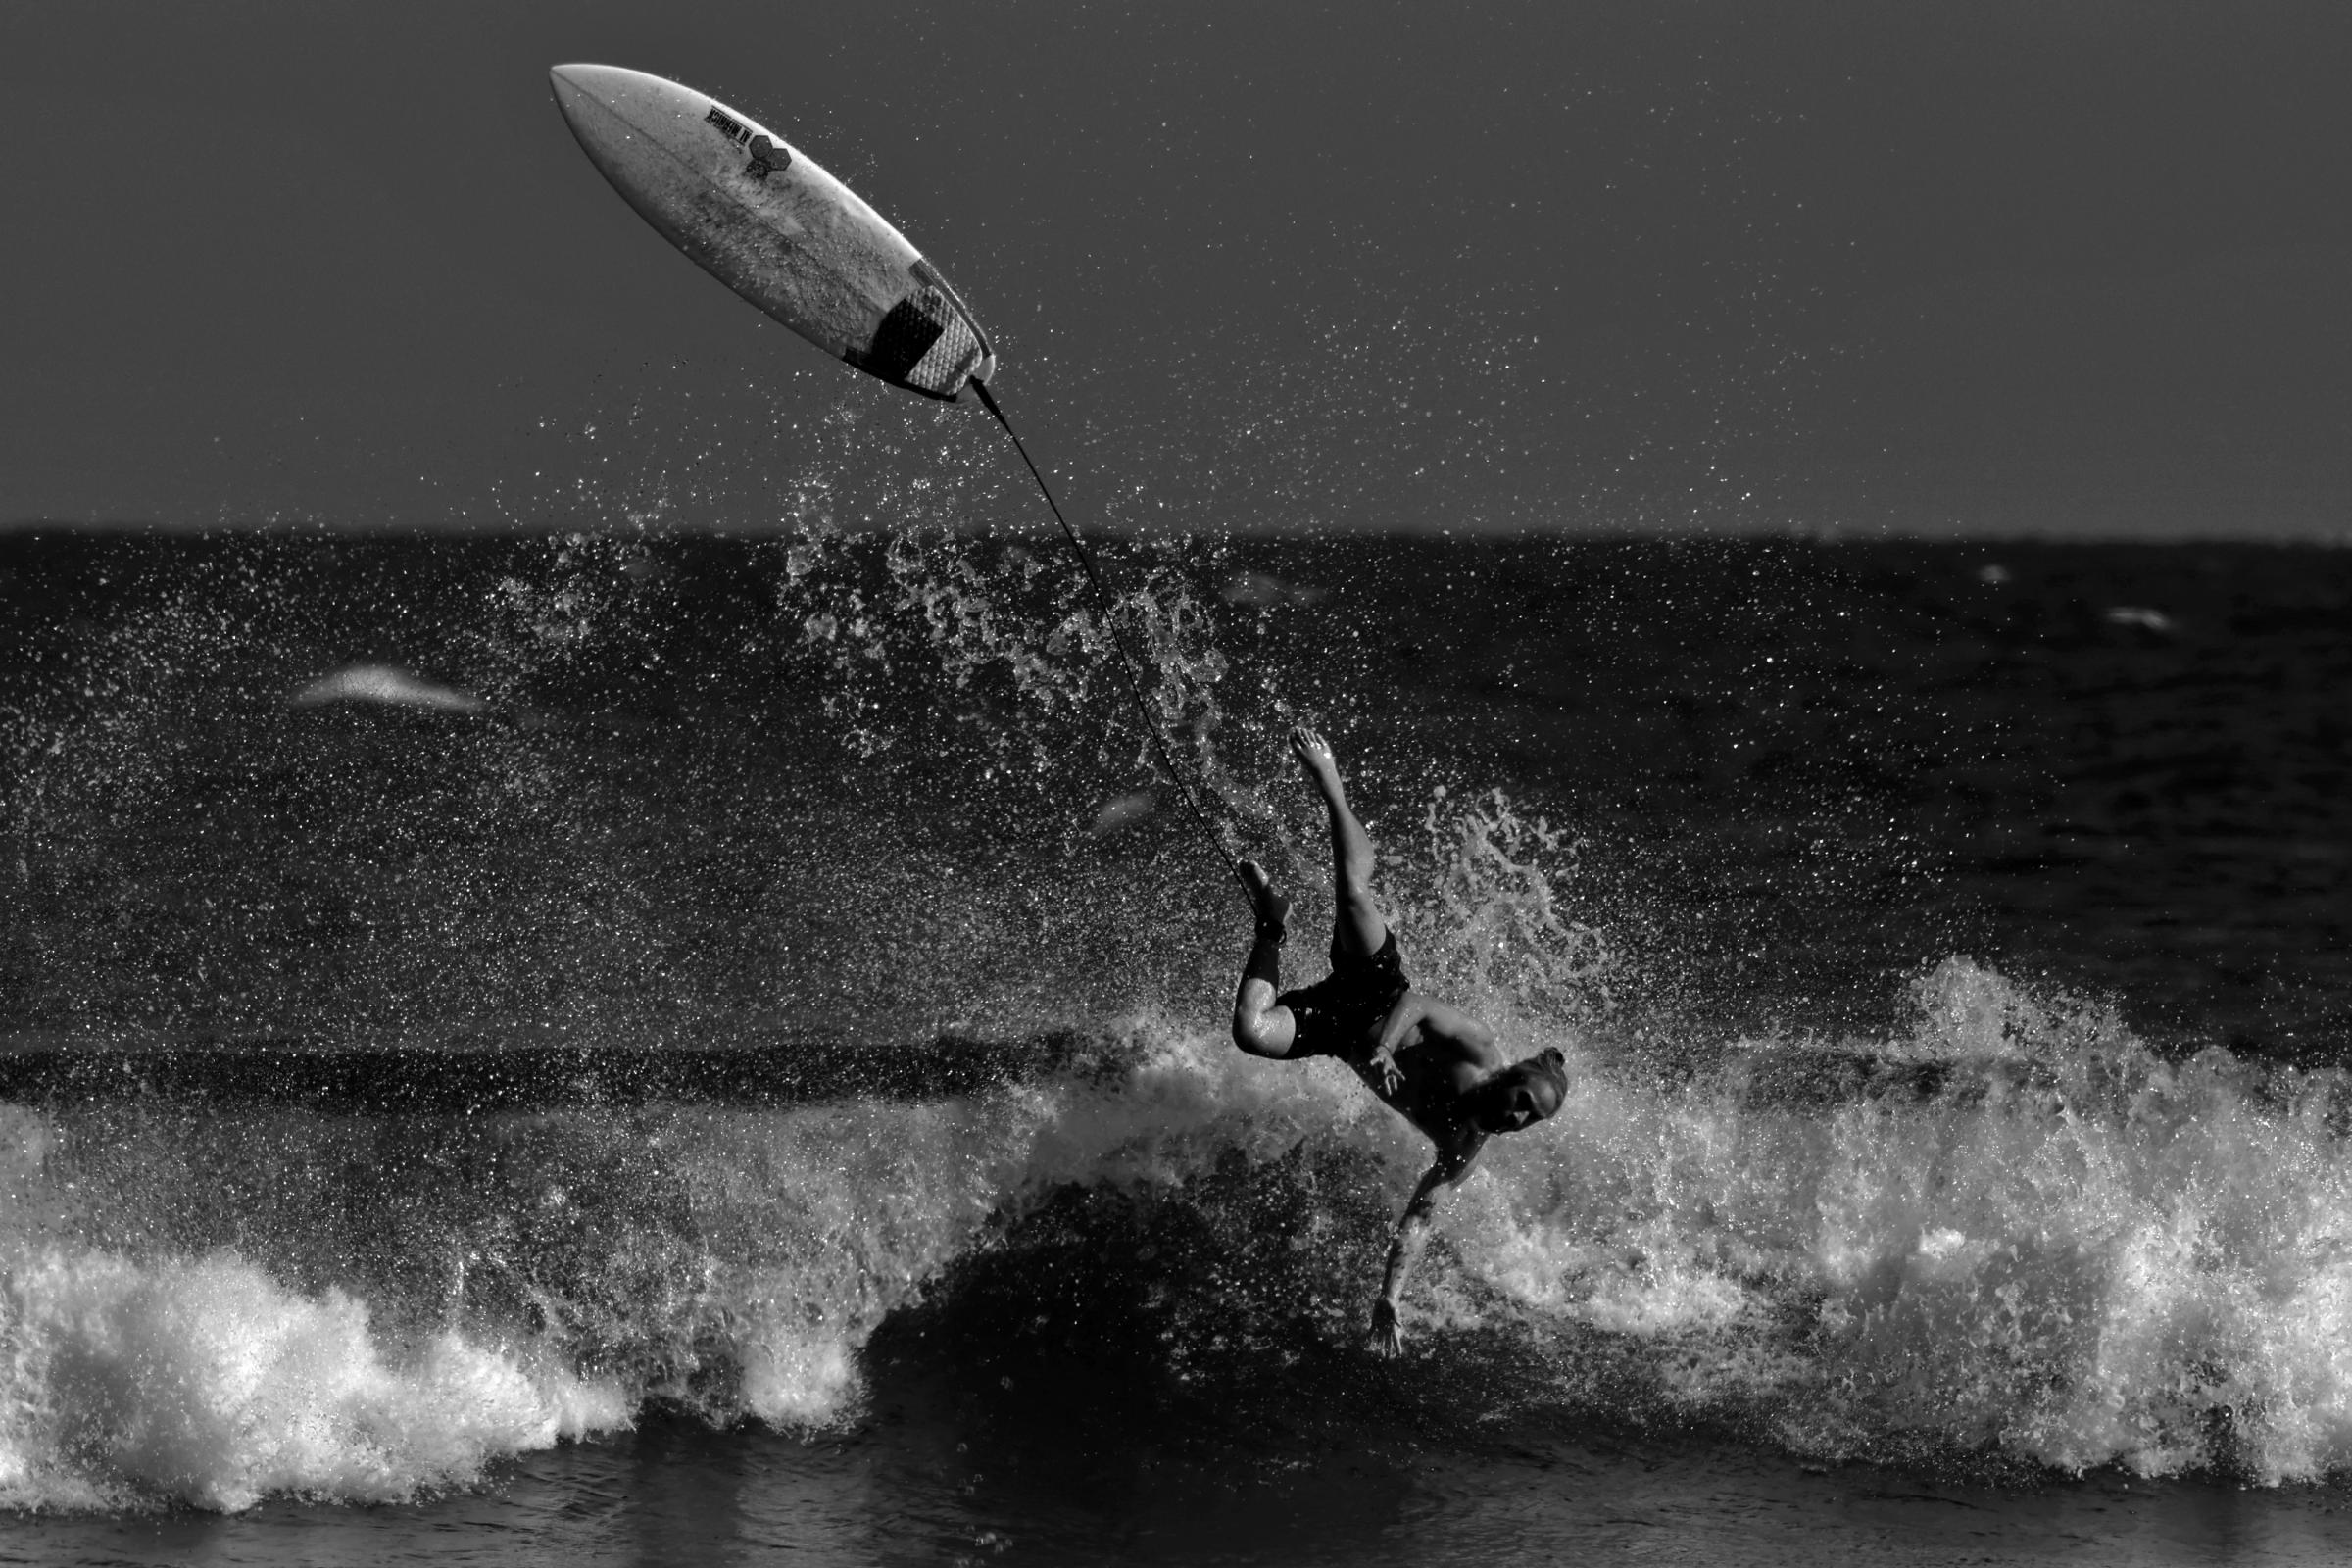 SoCal Surfing -   